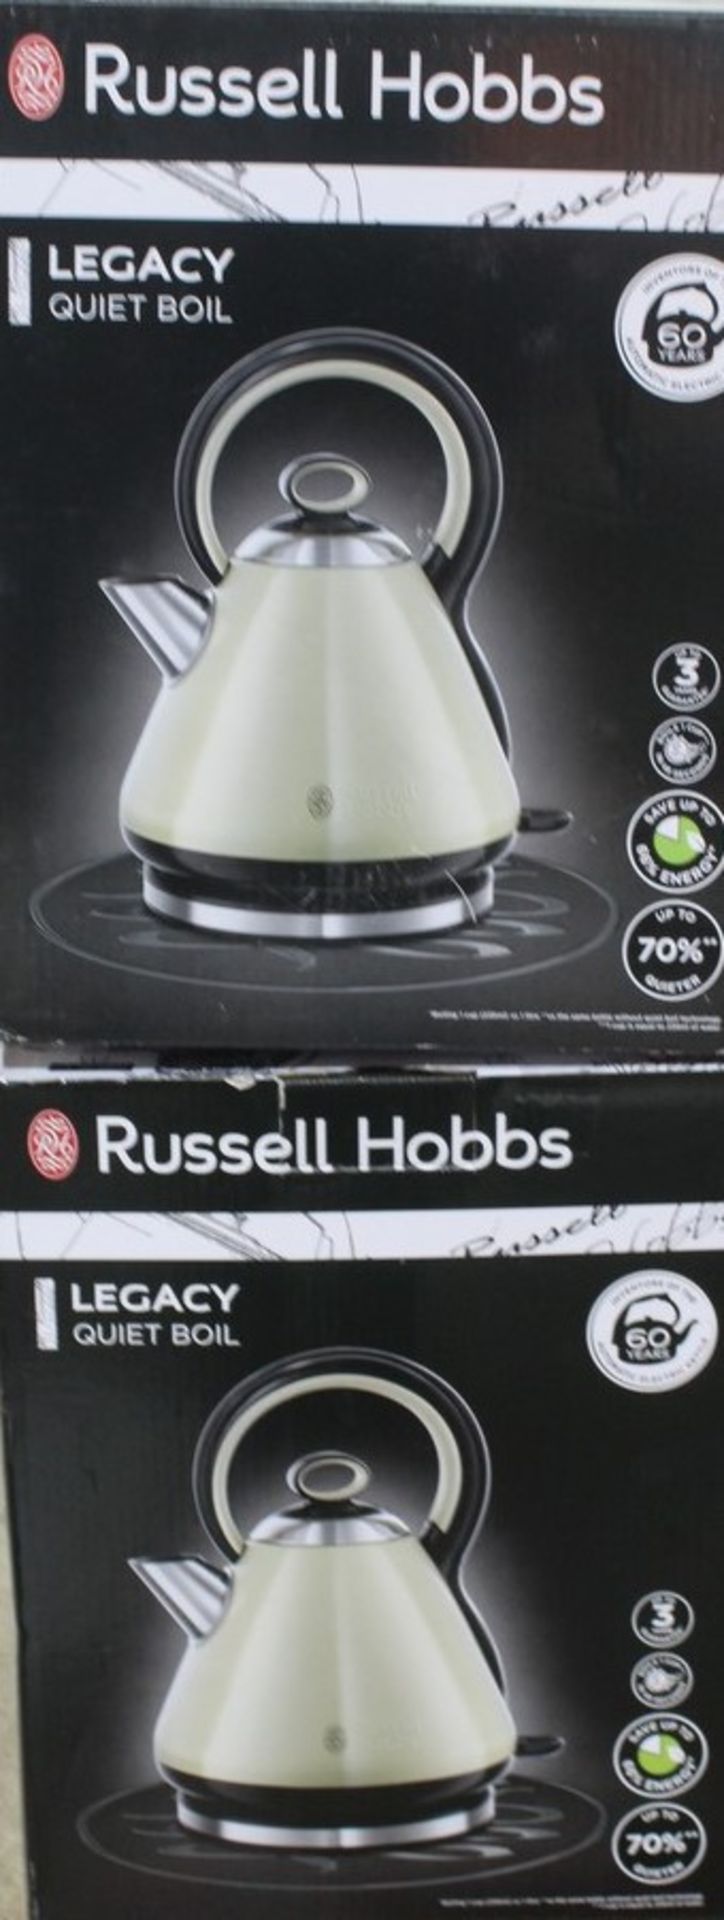 Boxed Russell Hobbs Legacy Quiet Boil 1.5 Litre Cordless Jug Kettles RRP £50 Each (Appraisals